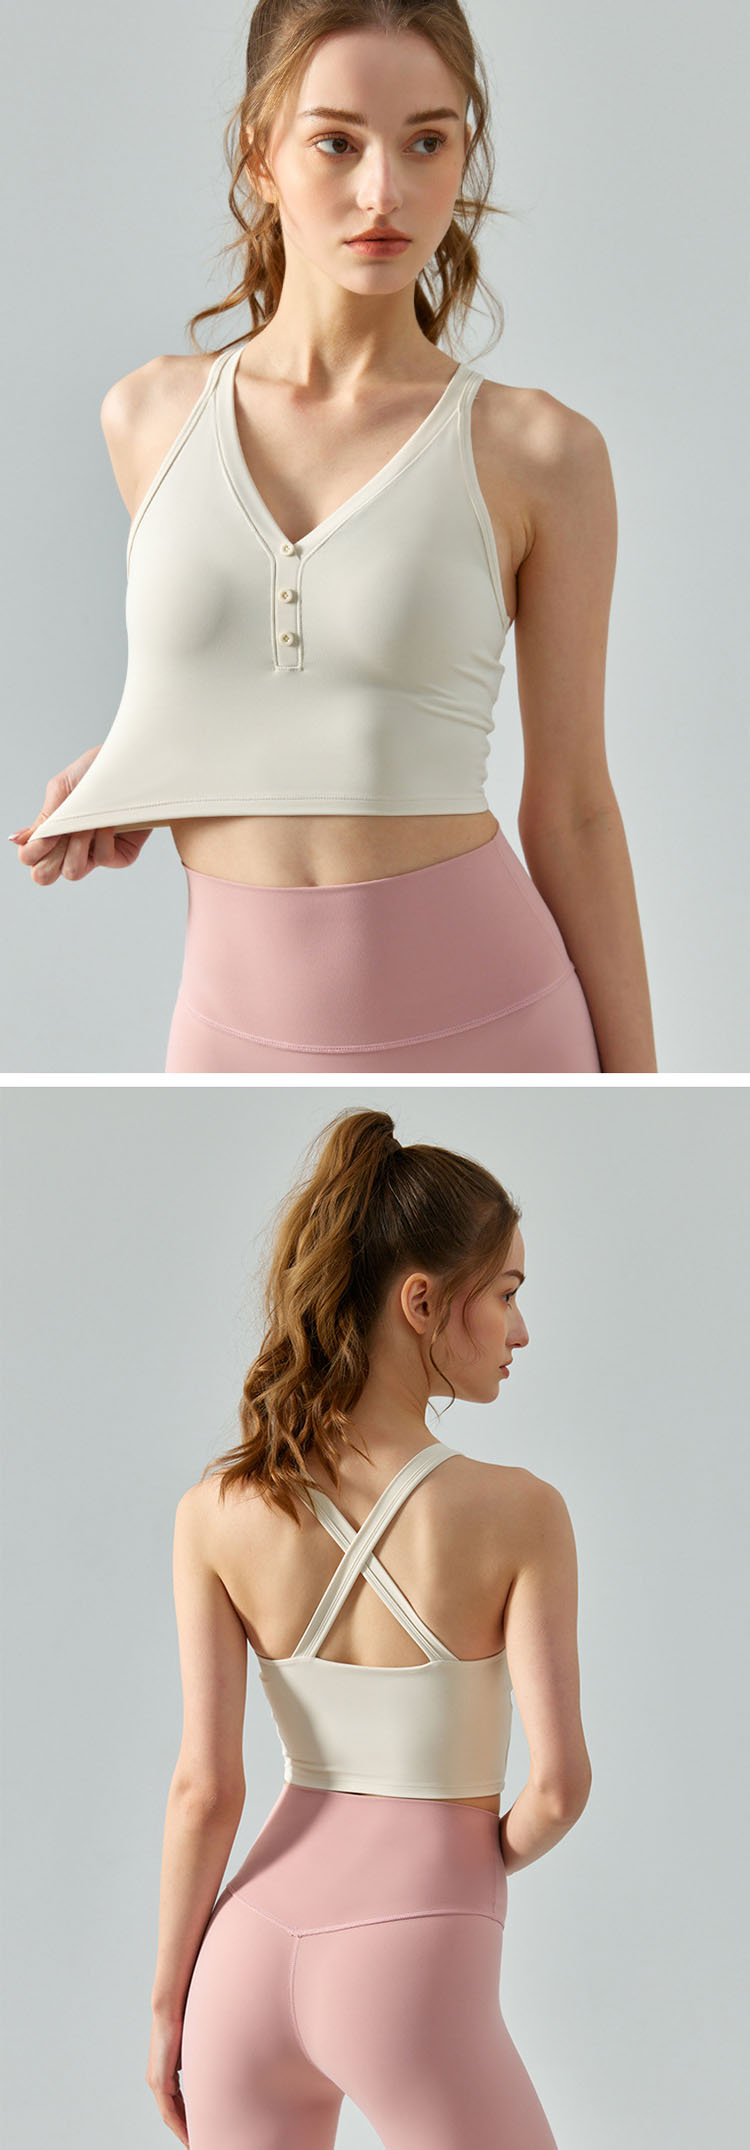 Strap sports bra successfully visibly lengthens the neck line and accentuates the beauty of bone by causing the exposed skin